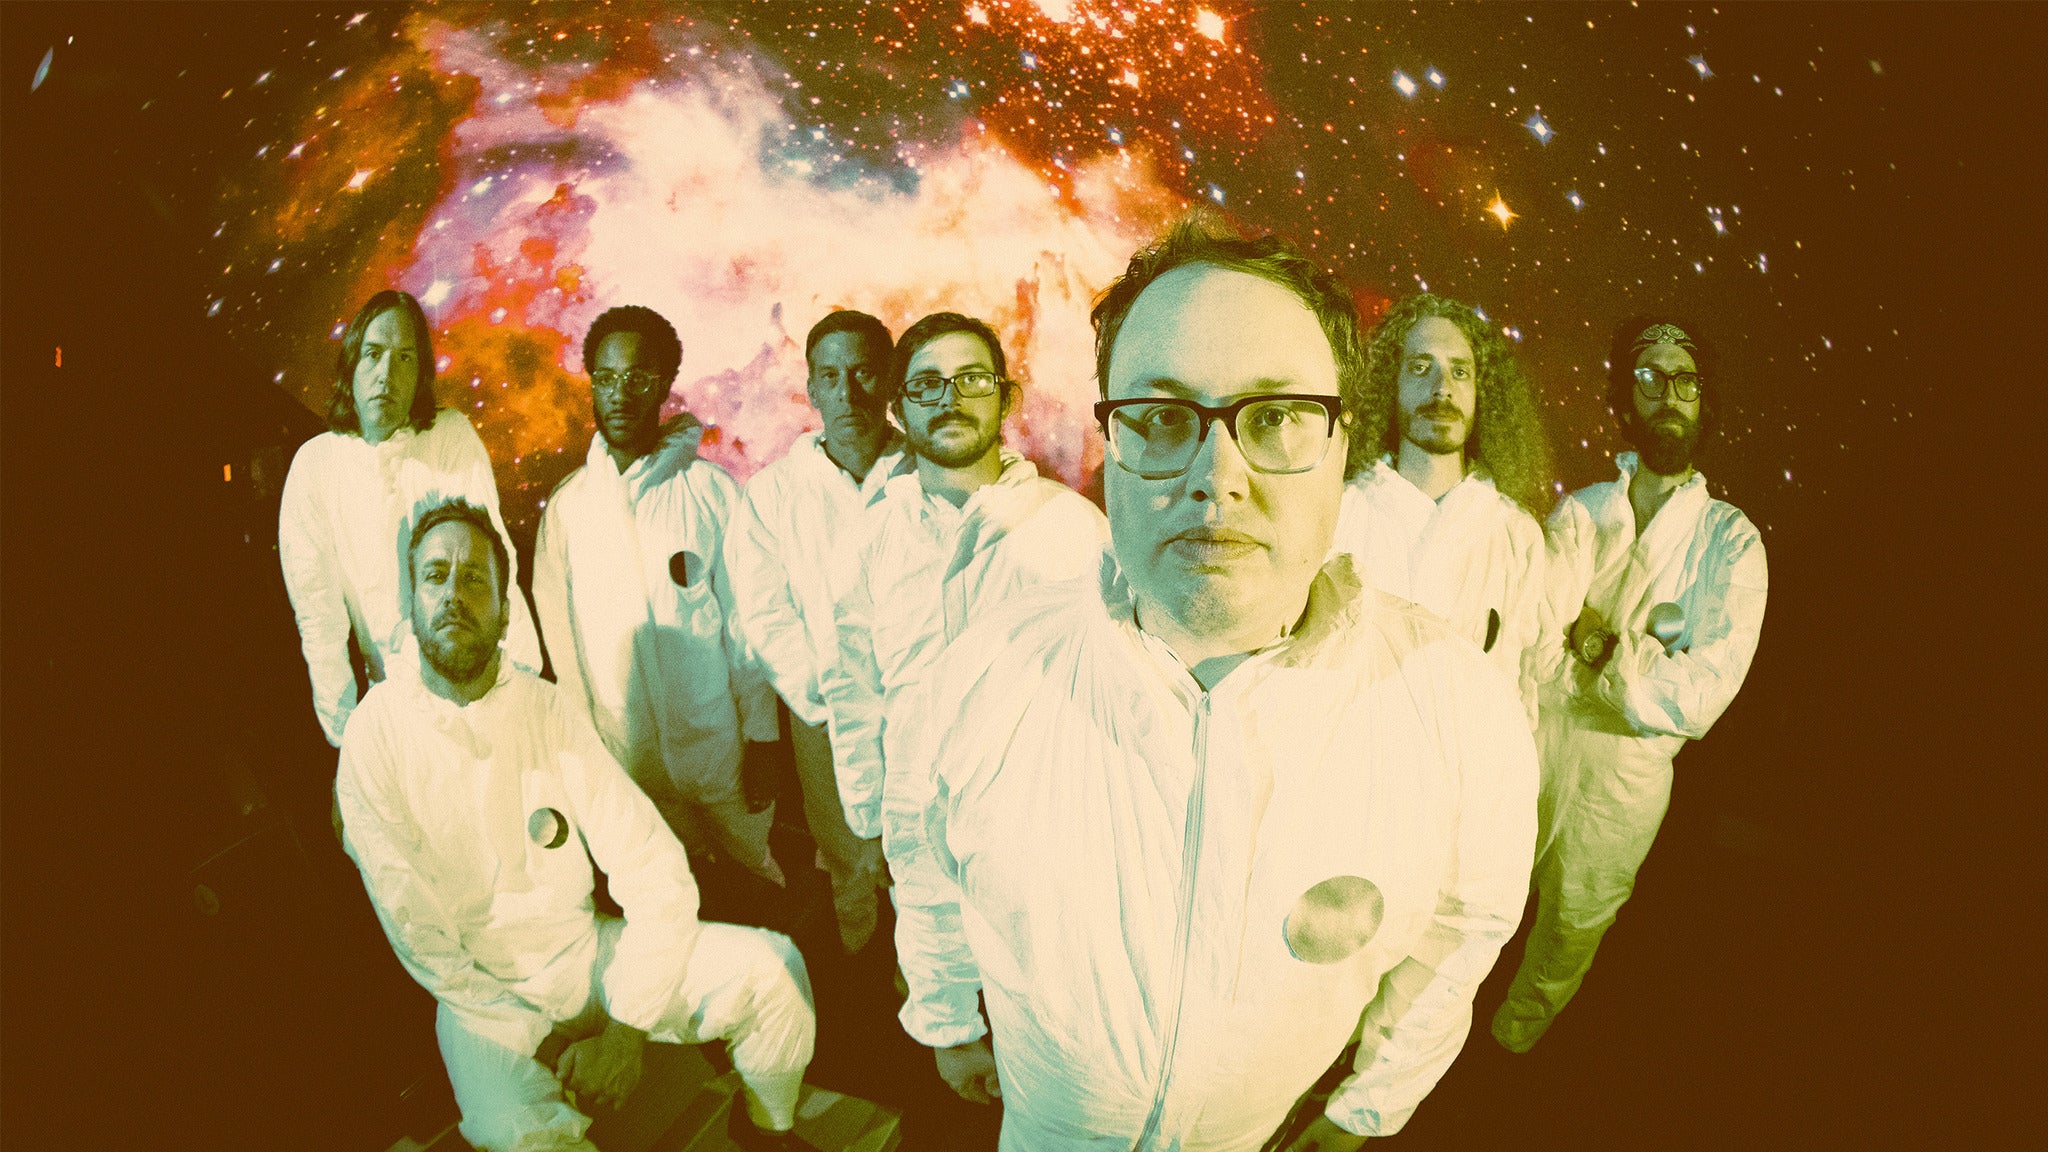 St. Paul and the Broken Bones: The Alien Coast Tour in Seattle promo photo for Spotify presale offer code